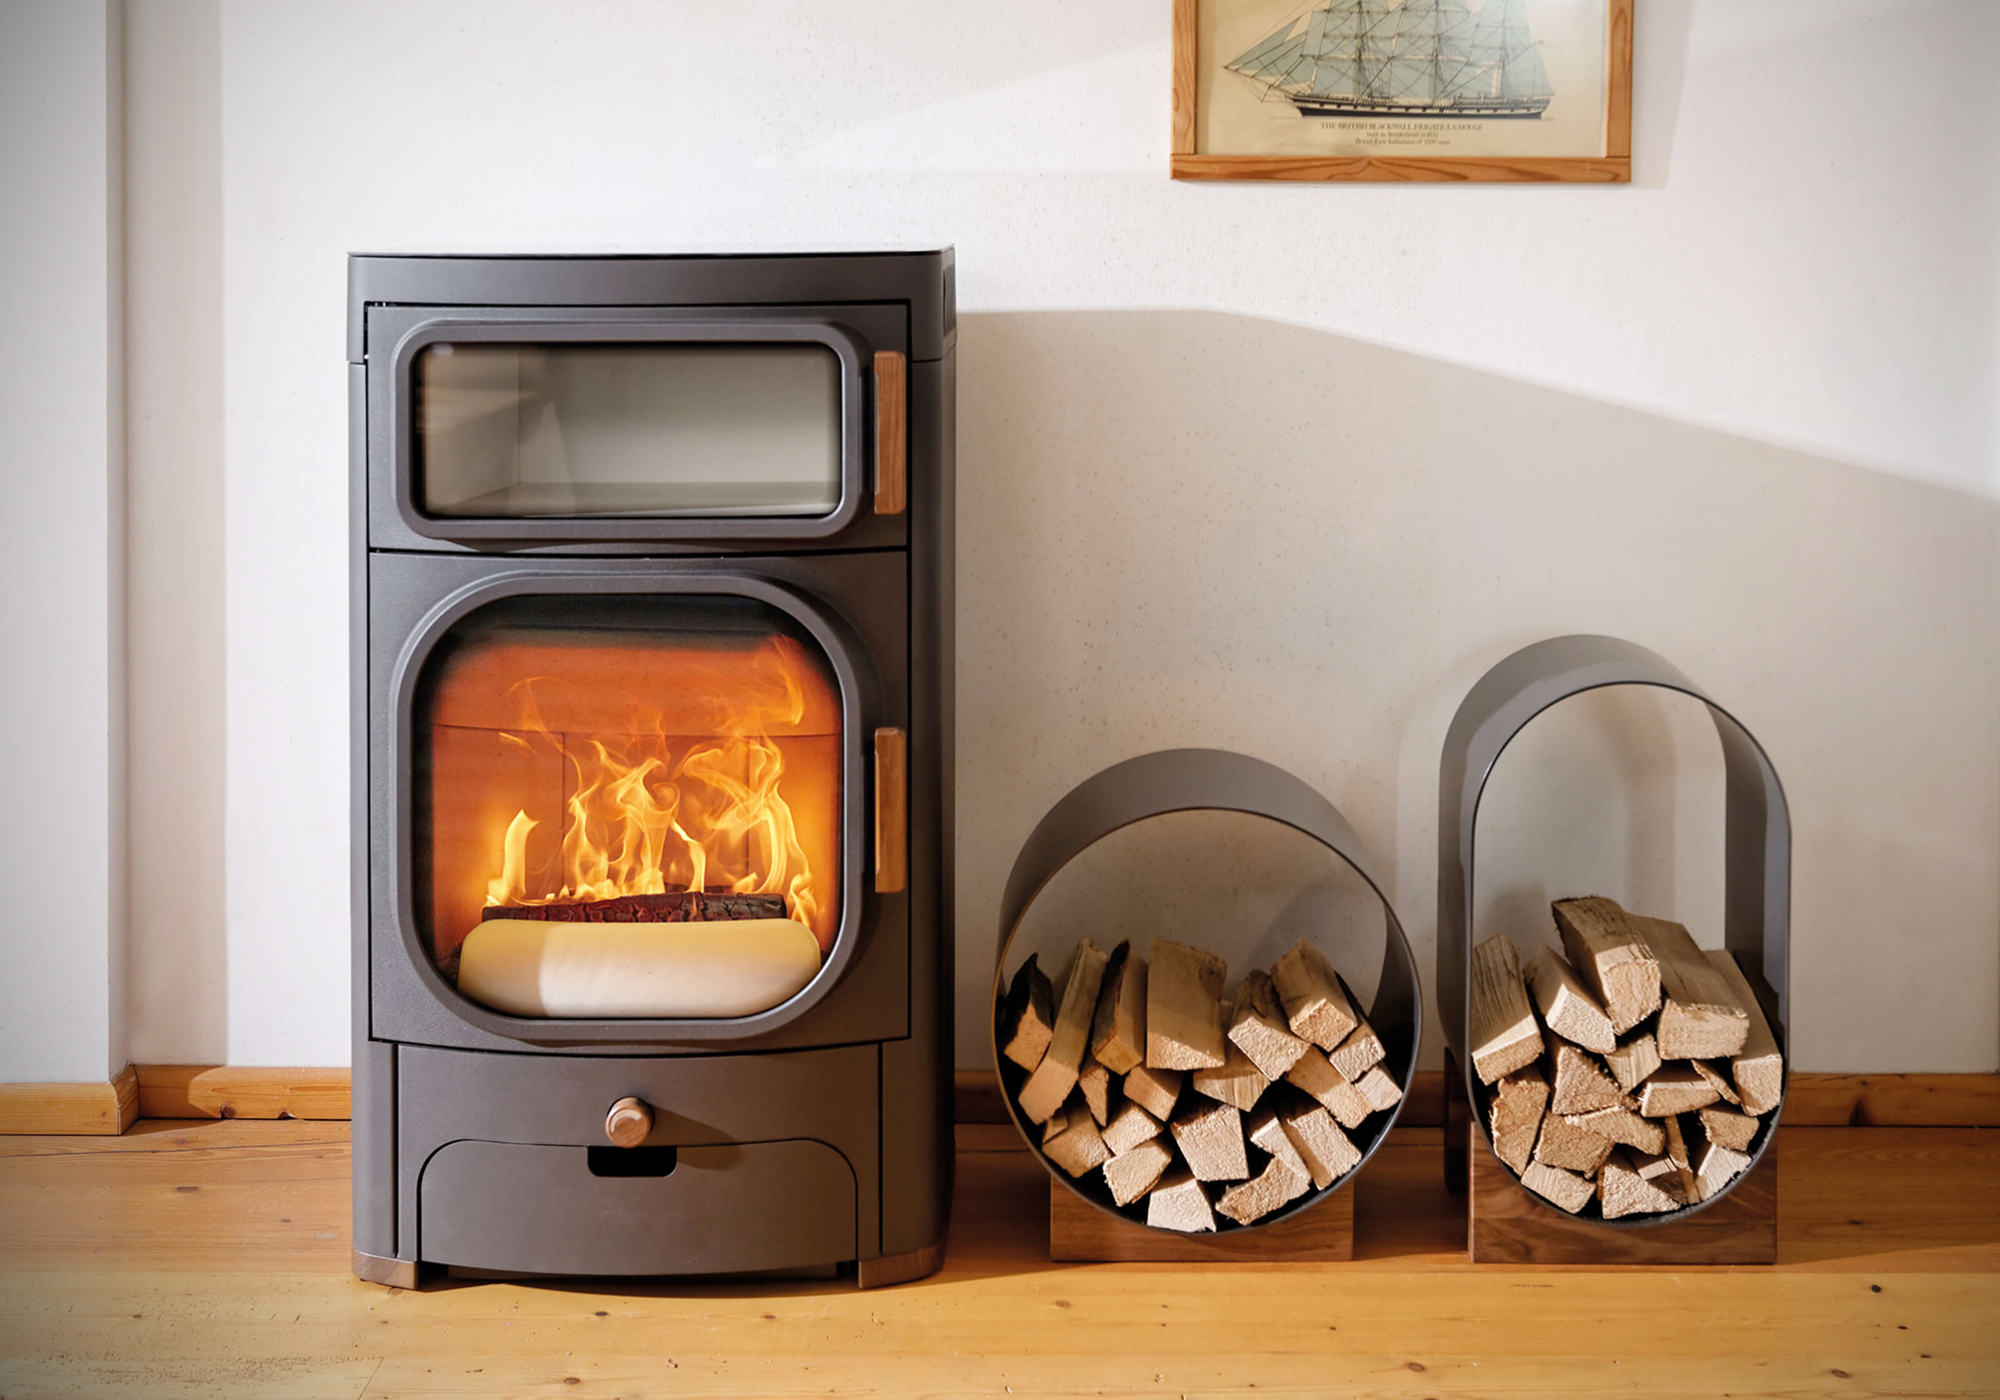 10 wood burner ideas to add warmth and coziness to your home